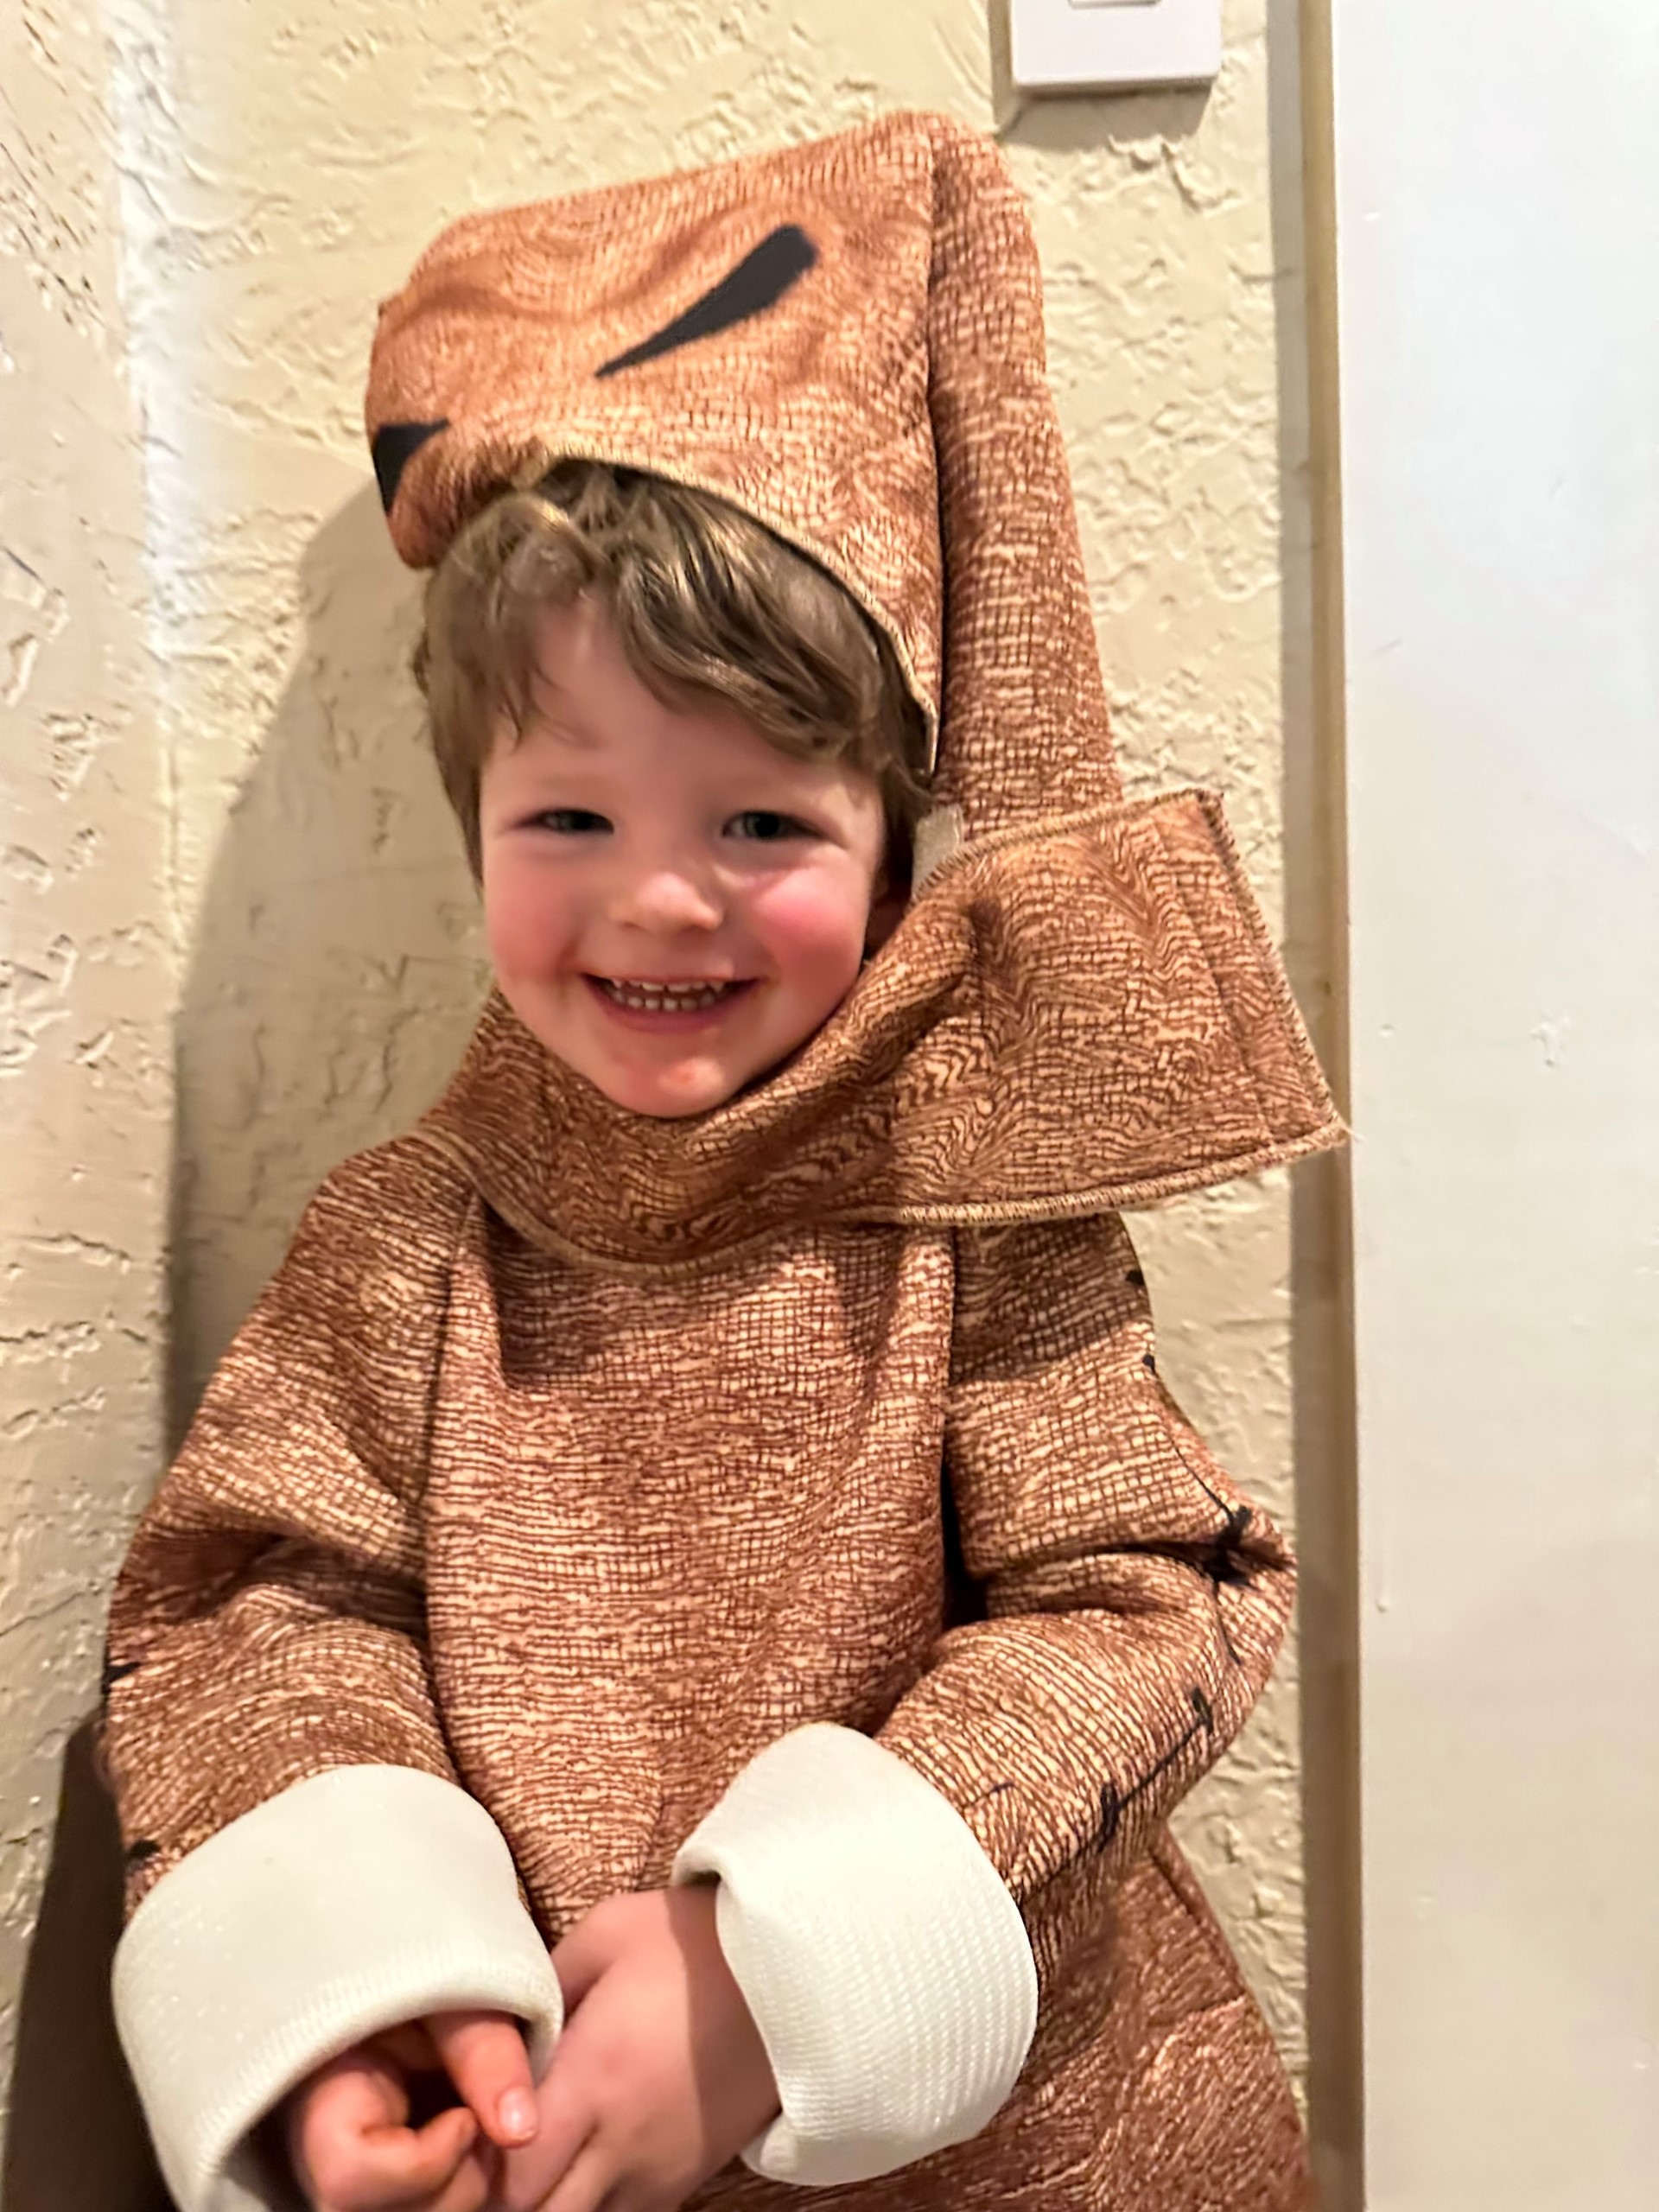 toddler smiling at the viewer wears a brown elvish costume with large white cuffs